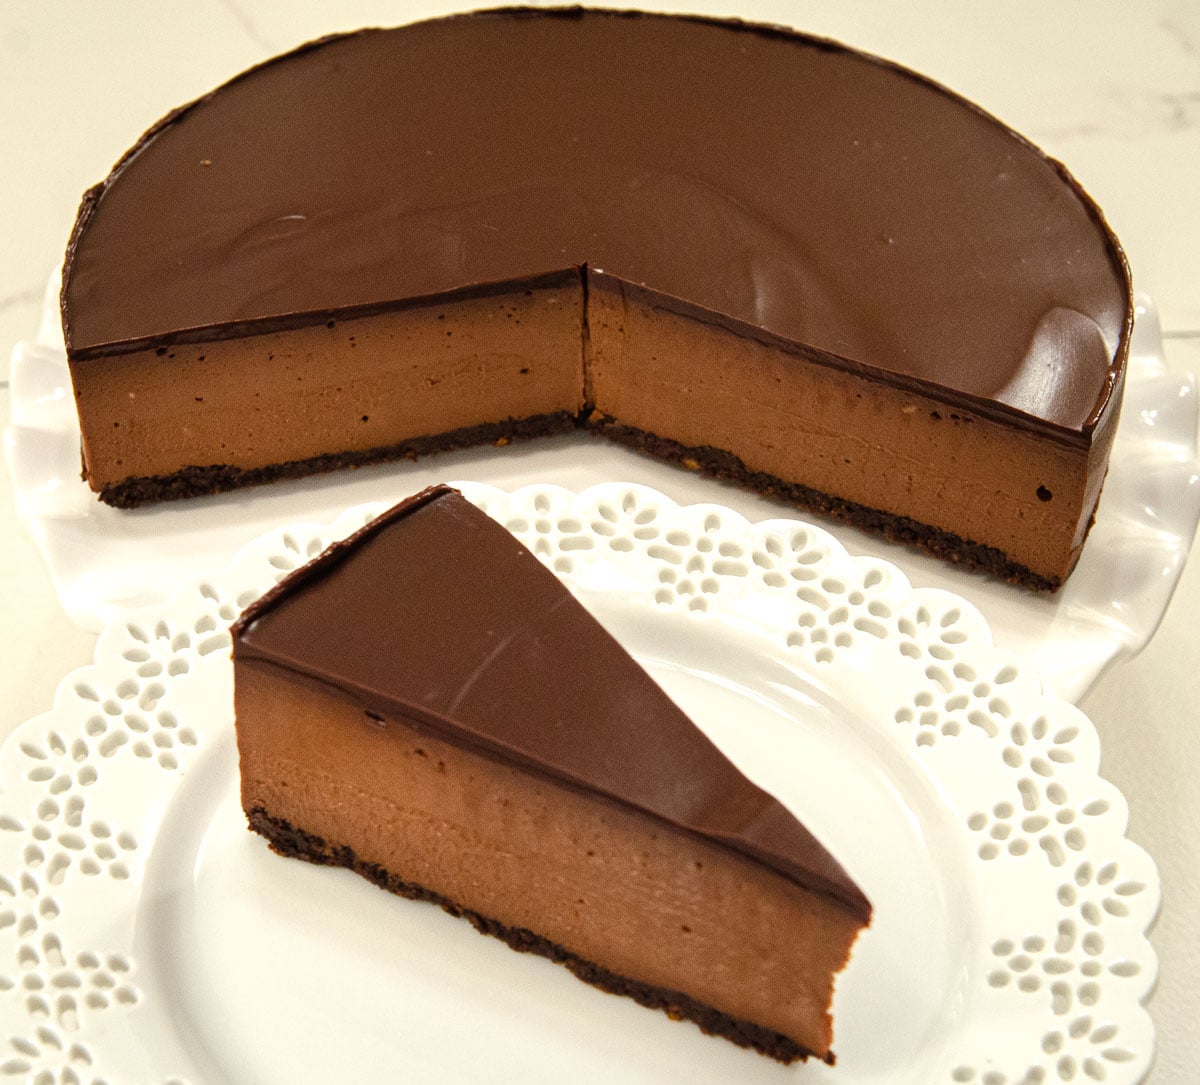 A slice of Triple Chocolate Cheesecake with the cheesecake in the background.